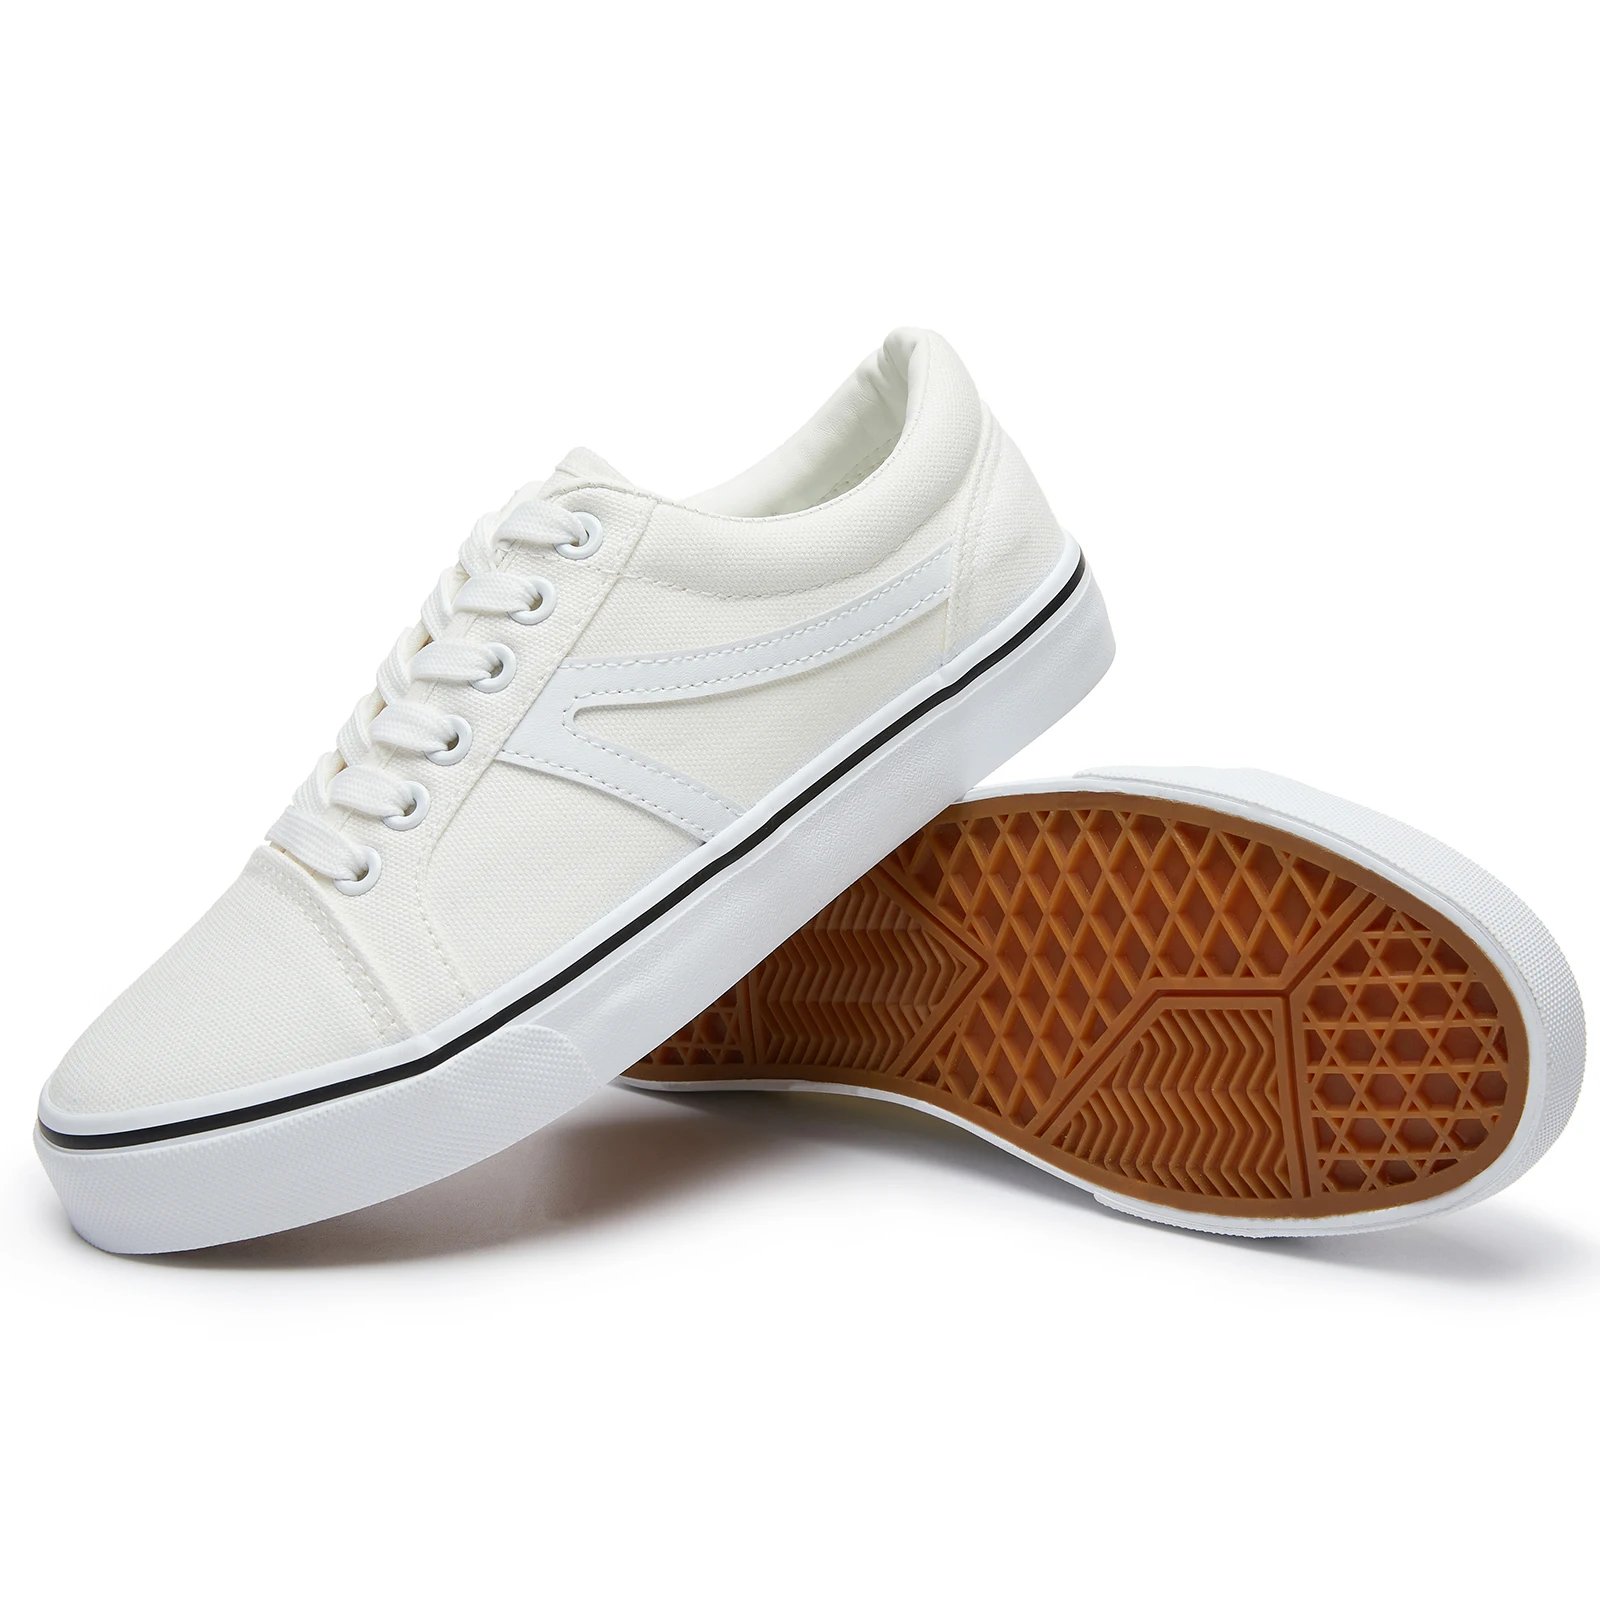 Men's and women's shoes Durable non-slip canvas shoes Customized blank casual shoes